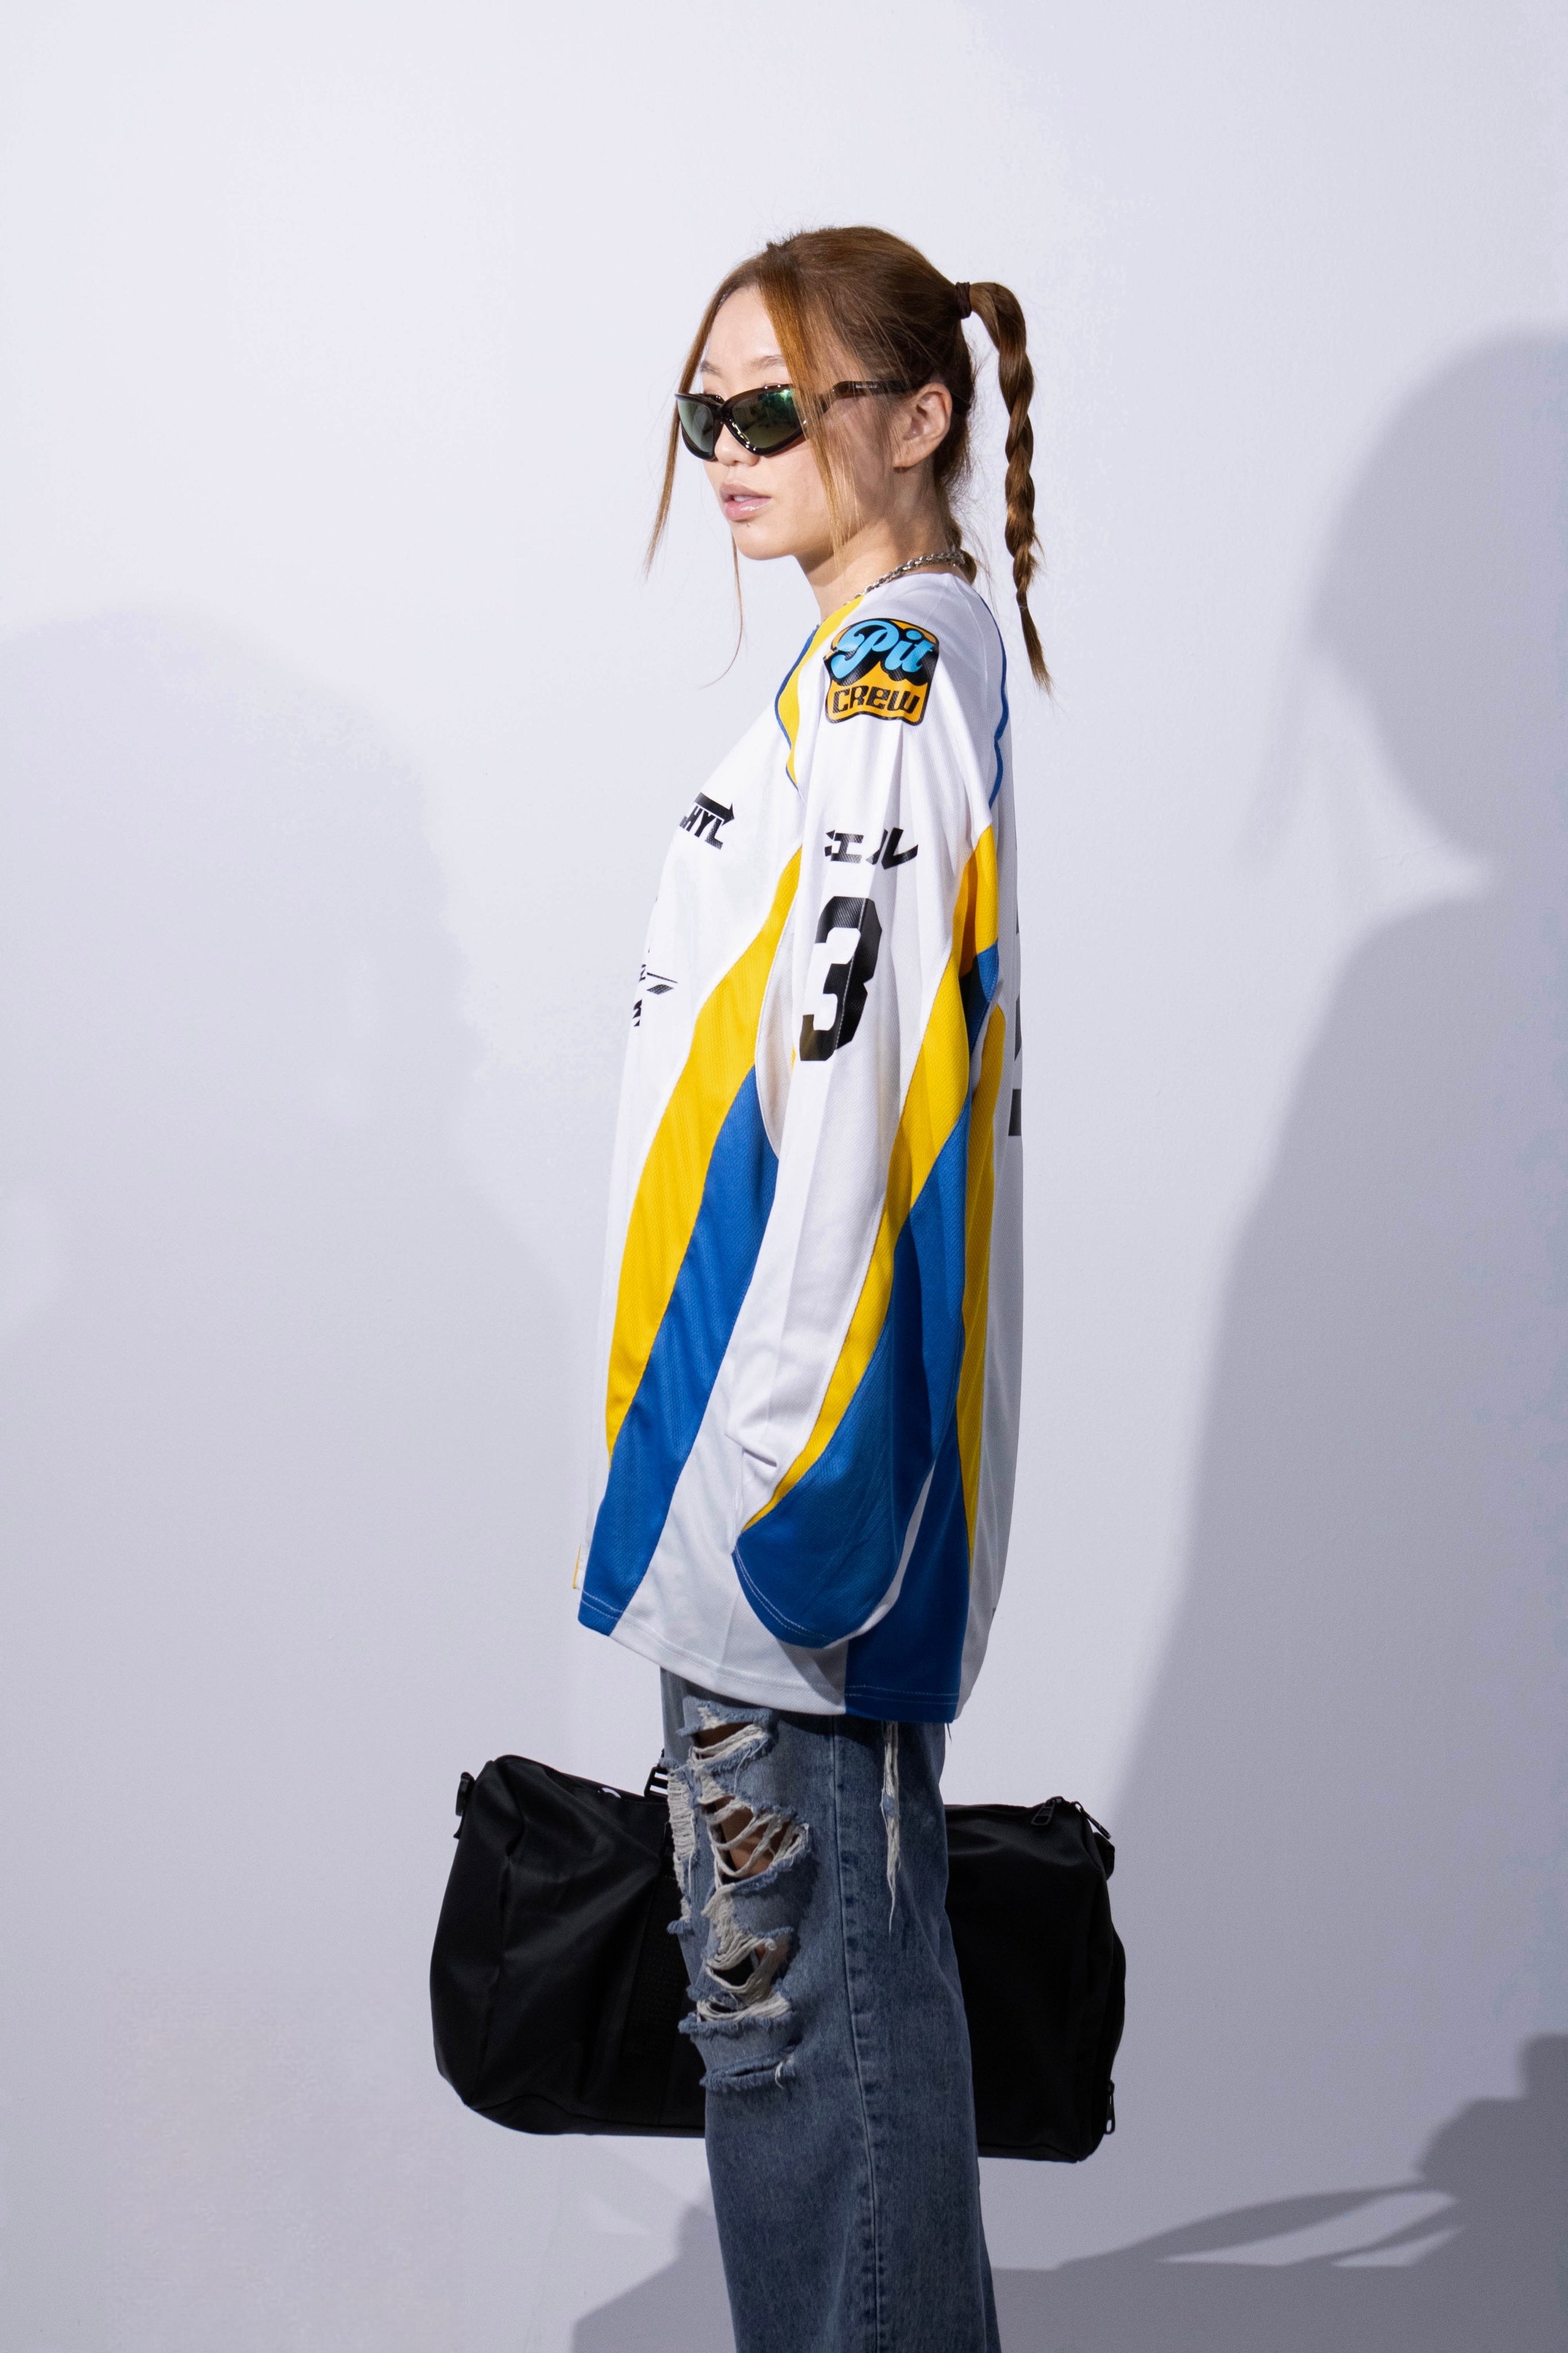 CHYL White Racing Jersey Female Model Side